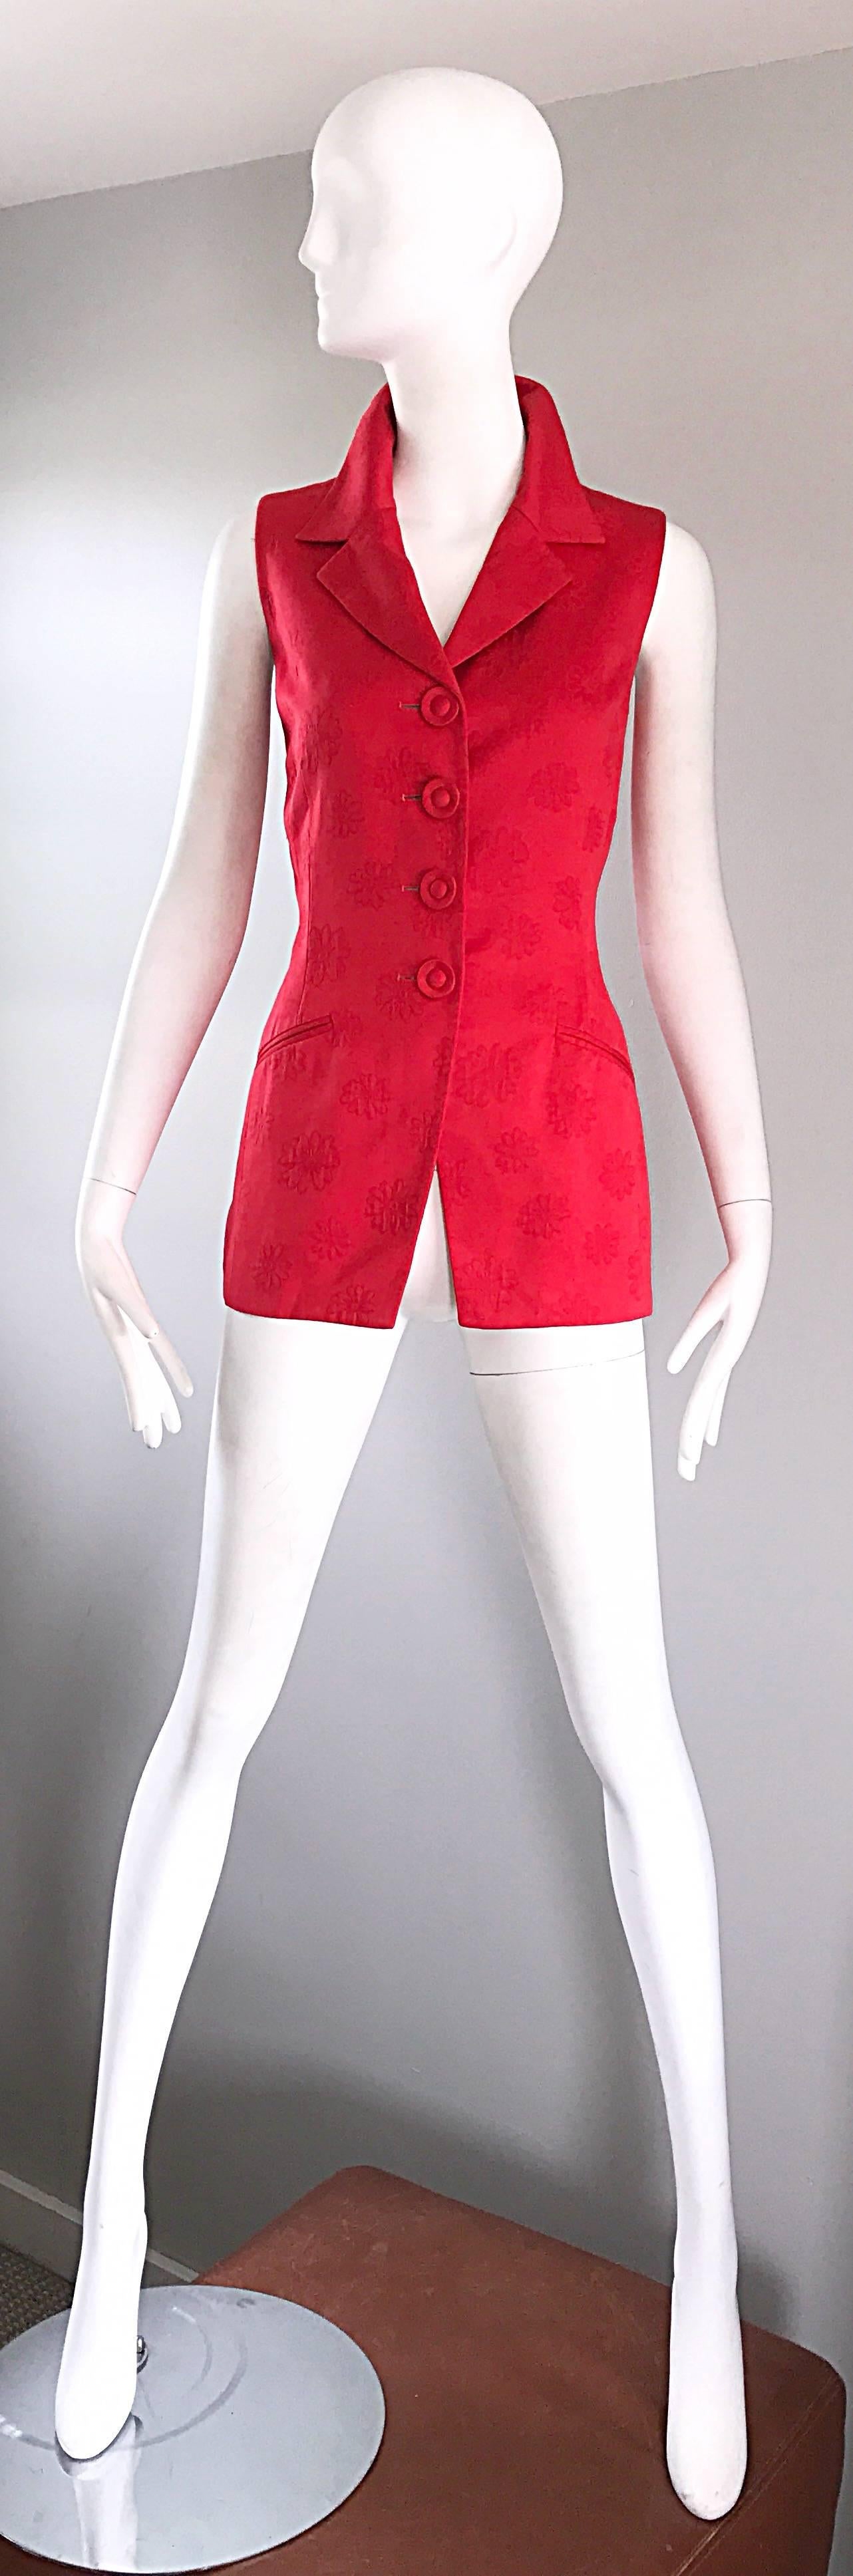 Beautiful vintage 90s CHRISTIAN DIOR lipstick red flower embroidered vest! Chic fitted tailored bodice looks amazing on! Four fabric covered buttons up the bodice, and pockets at each side of the waist. Fully lined. Can easily be dressed up or down.